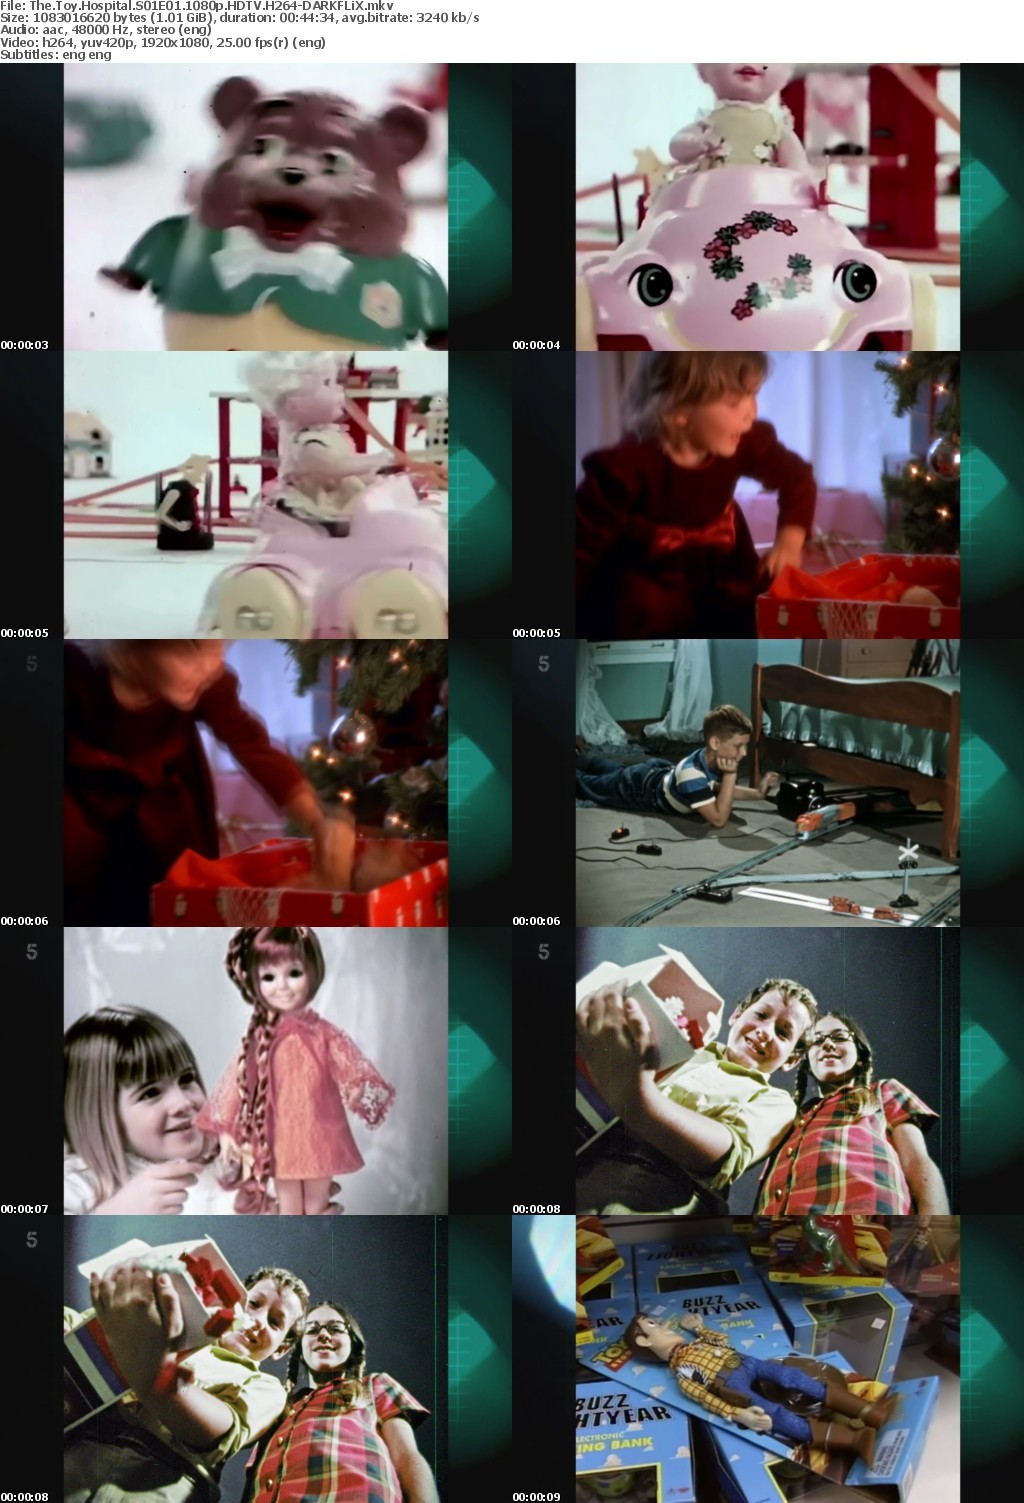 The Toy Hospital S01E01 1080p HDTV H264-DARKFLiX